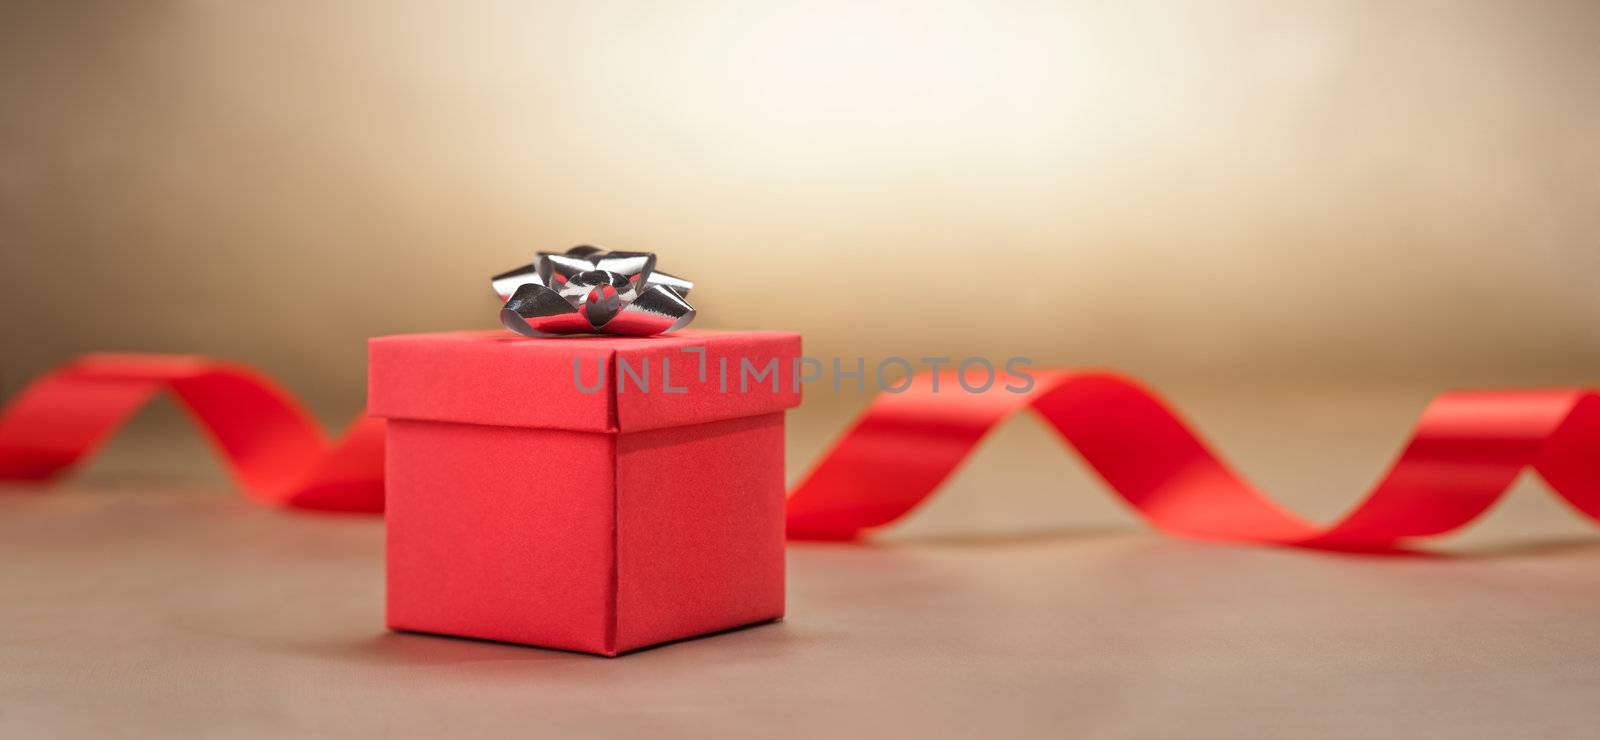 Present  in front of beige background nice for a wedding